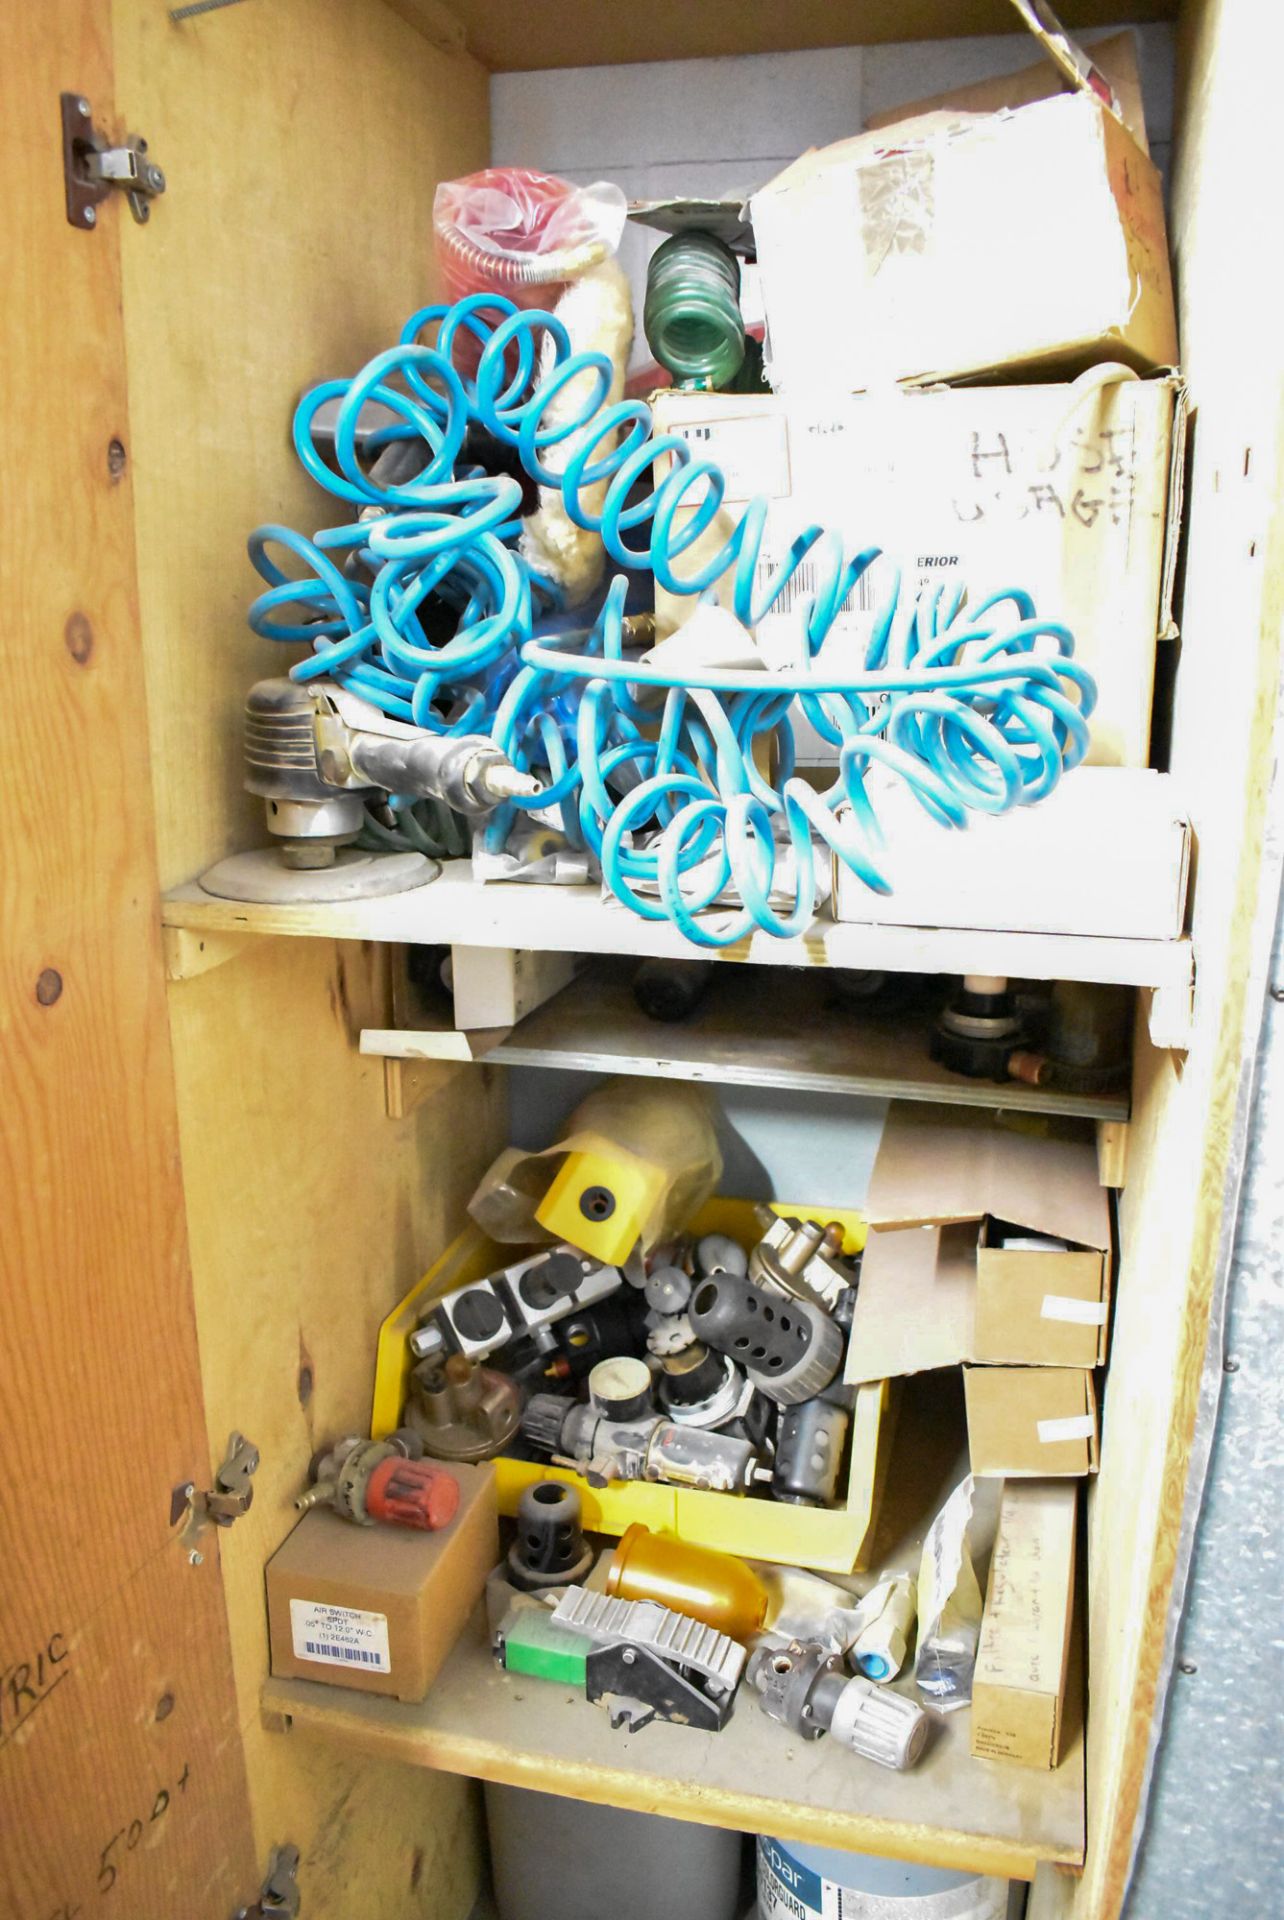 LOT/ STORAGE CABINETS WITH CONTENTS - SHOP SUPPLIES, CHEMICALS, HARDWARE, ELECTRICAL COMPONENTS, - Image 6 of 7